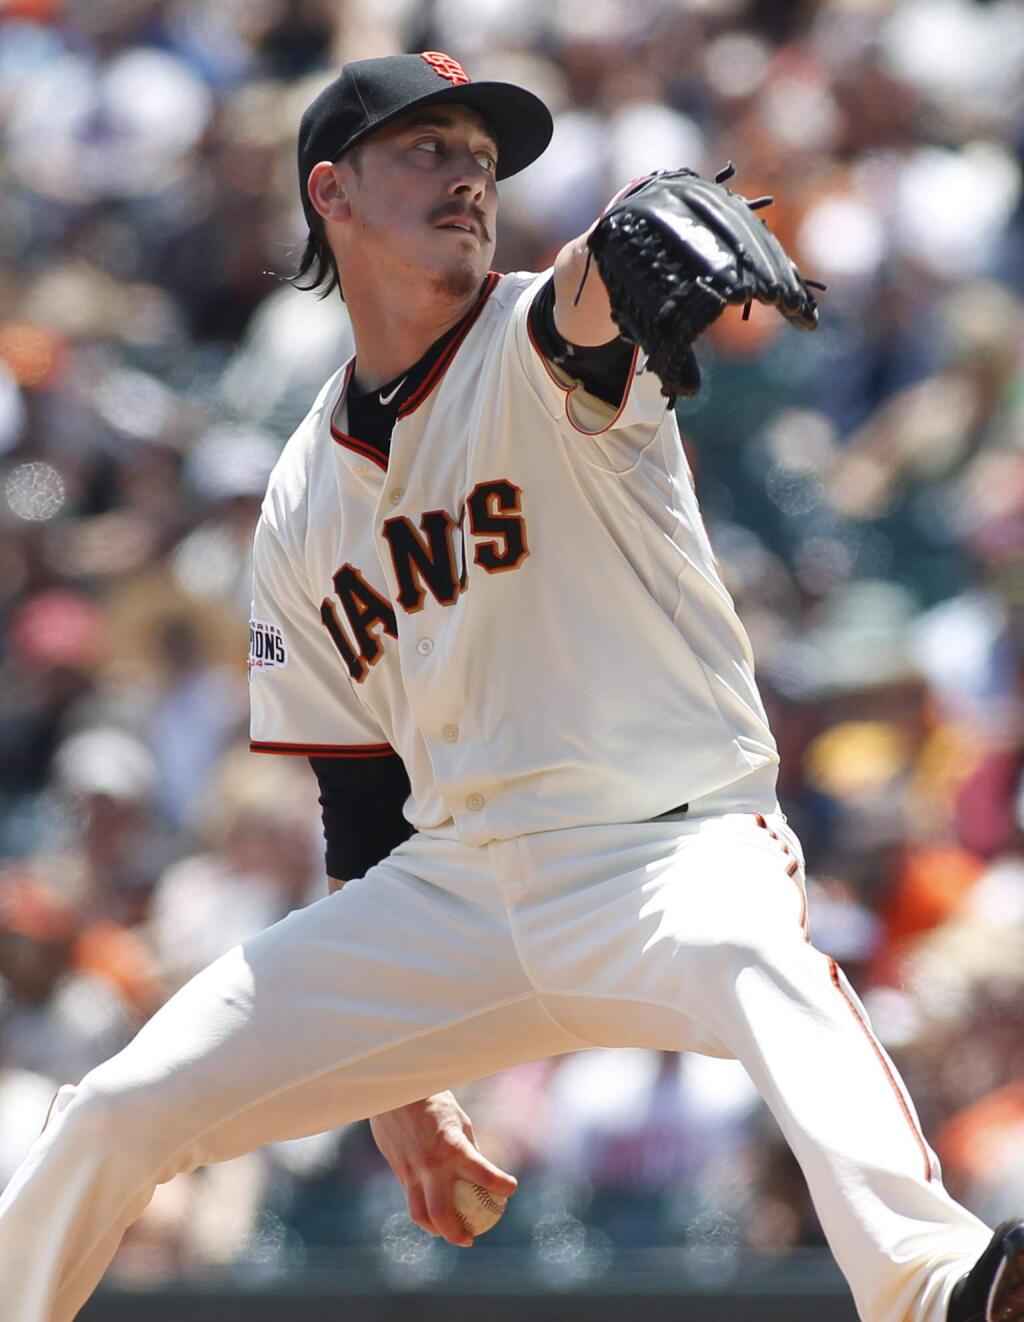 San Francisco Giants pitcher Tim Lincecum throws to the Colorado Rockies during the first inning of a baseball game, Saturday, June 27, 2015, in San Francisco. (AP Photo/George Nikitin)